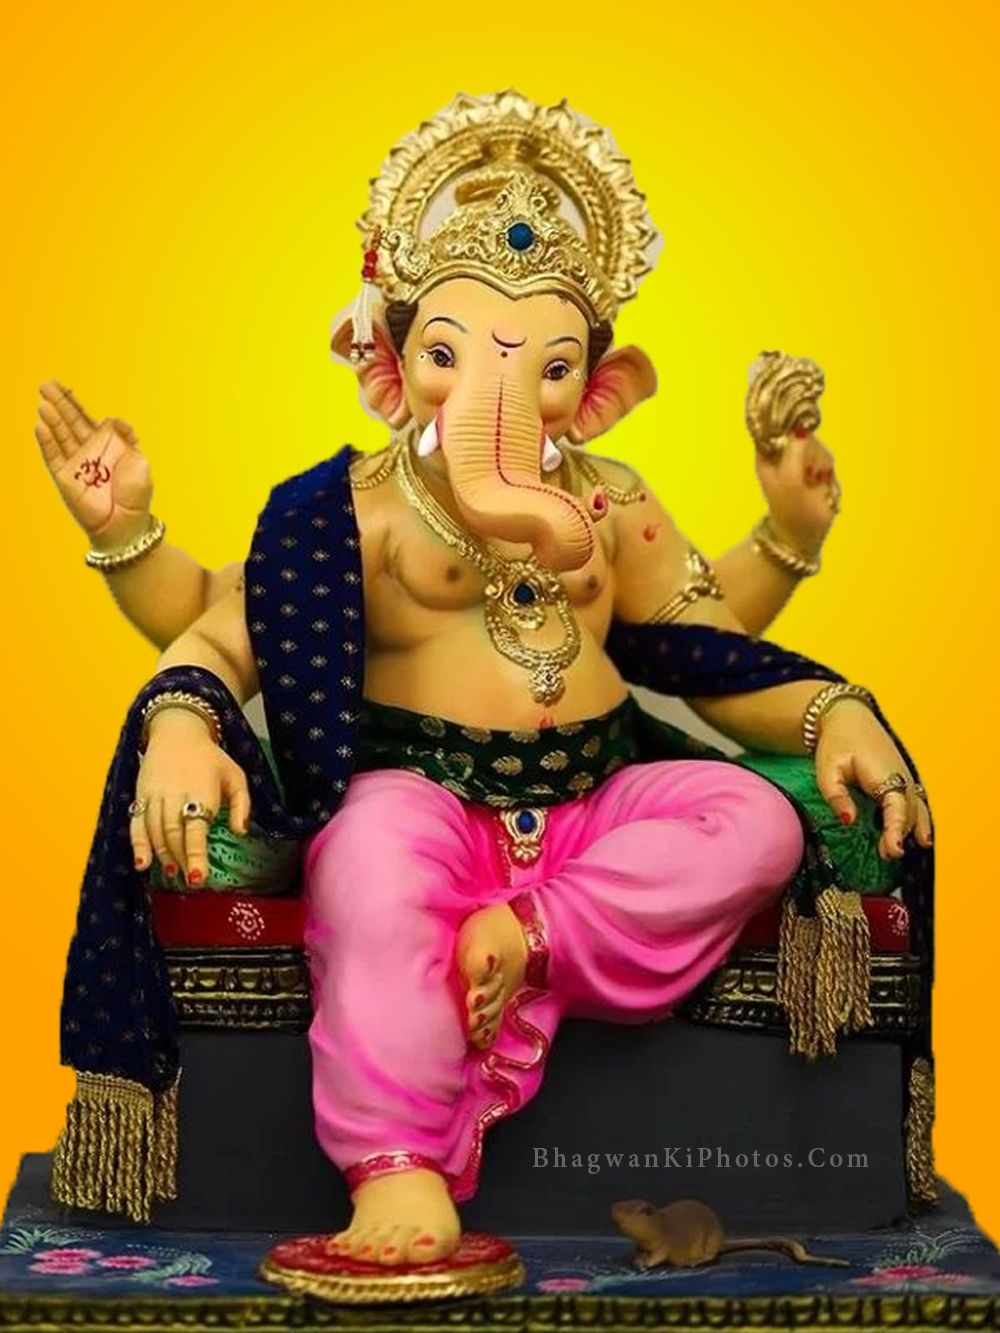 Download 999+ High-Quality Ganesh Images in HD 3D - Impressive Collection  for Full 4K Resolution